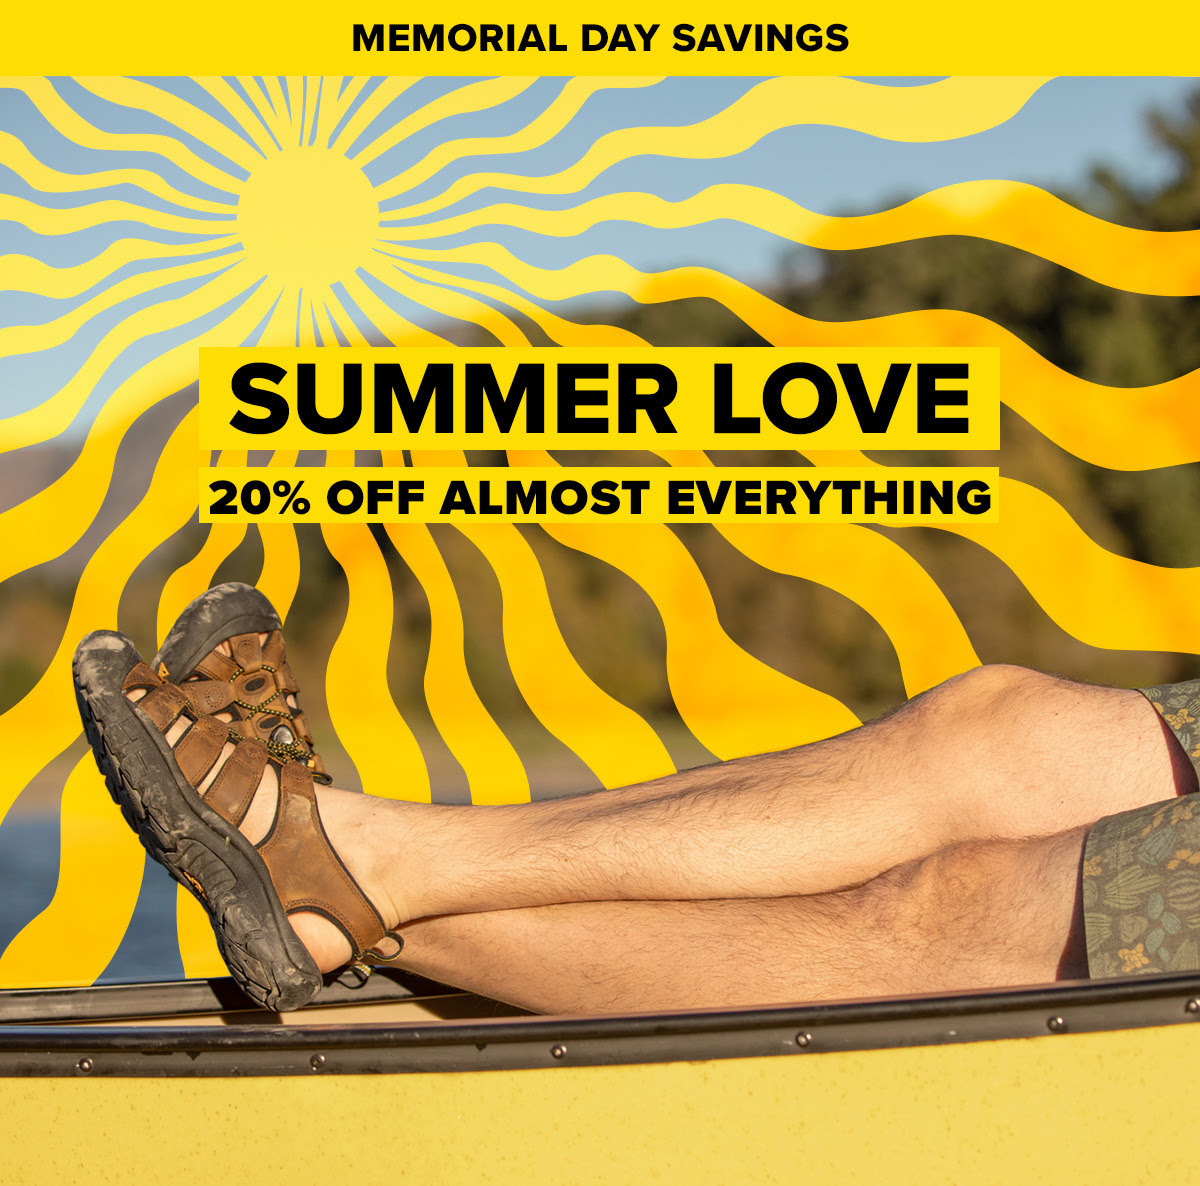 SUMMER LOVE 20% OFF ALMOST EVERYTHING